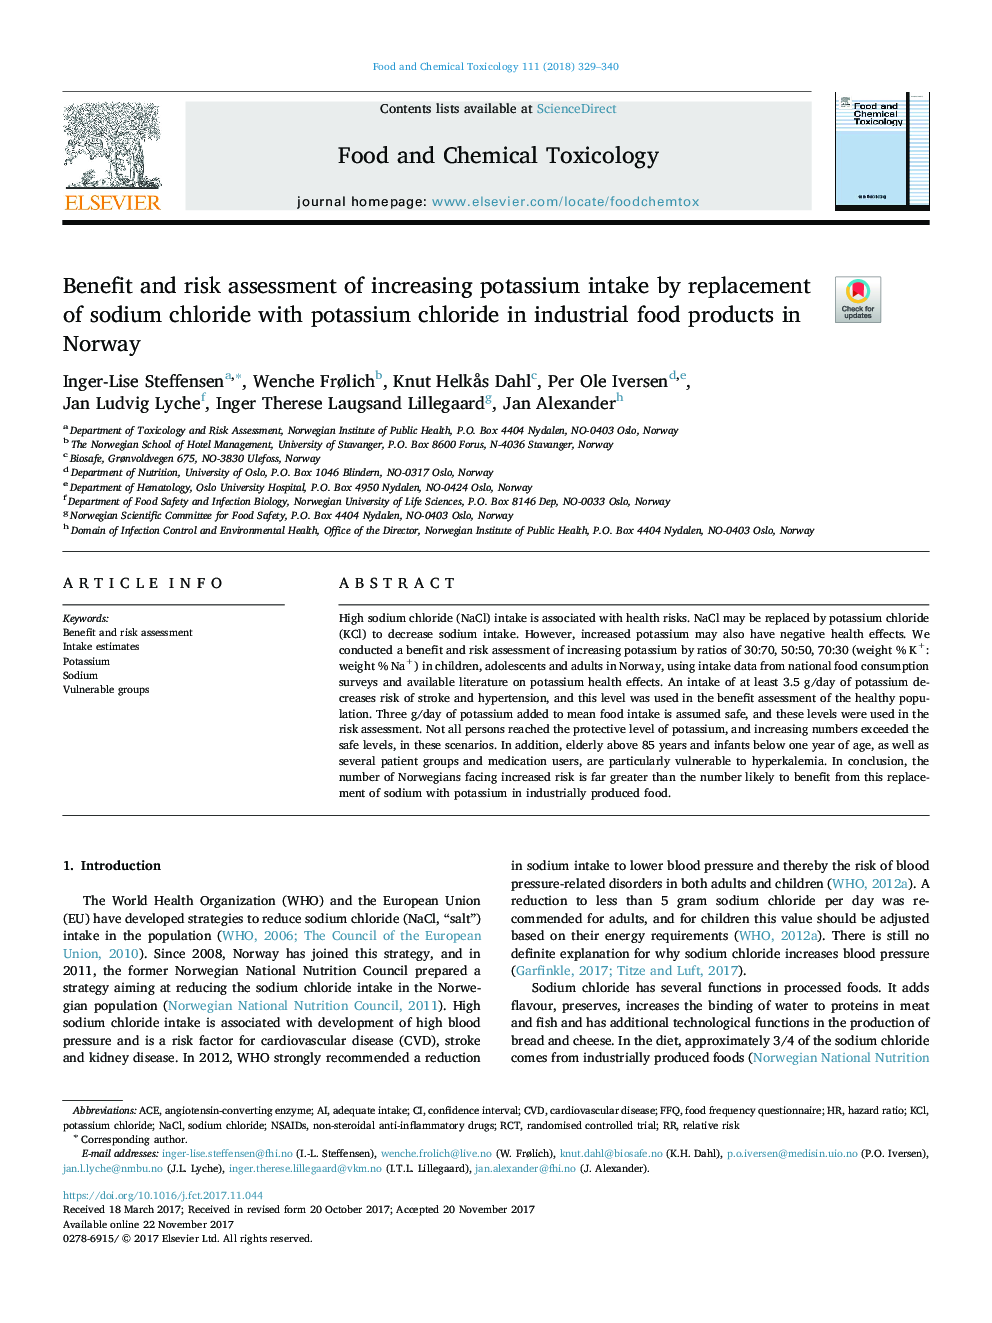 Benefit and risk assessment of increasing potassium intake by replacement of sodium chloride with potassium chloride in industrial food products in Norway